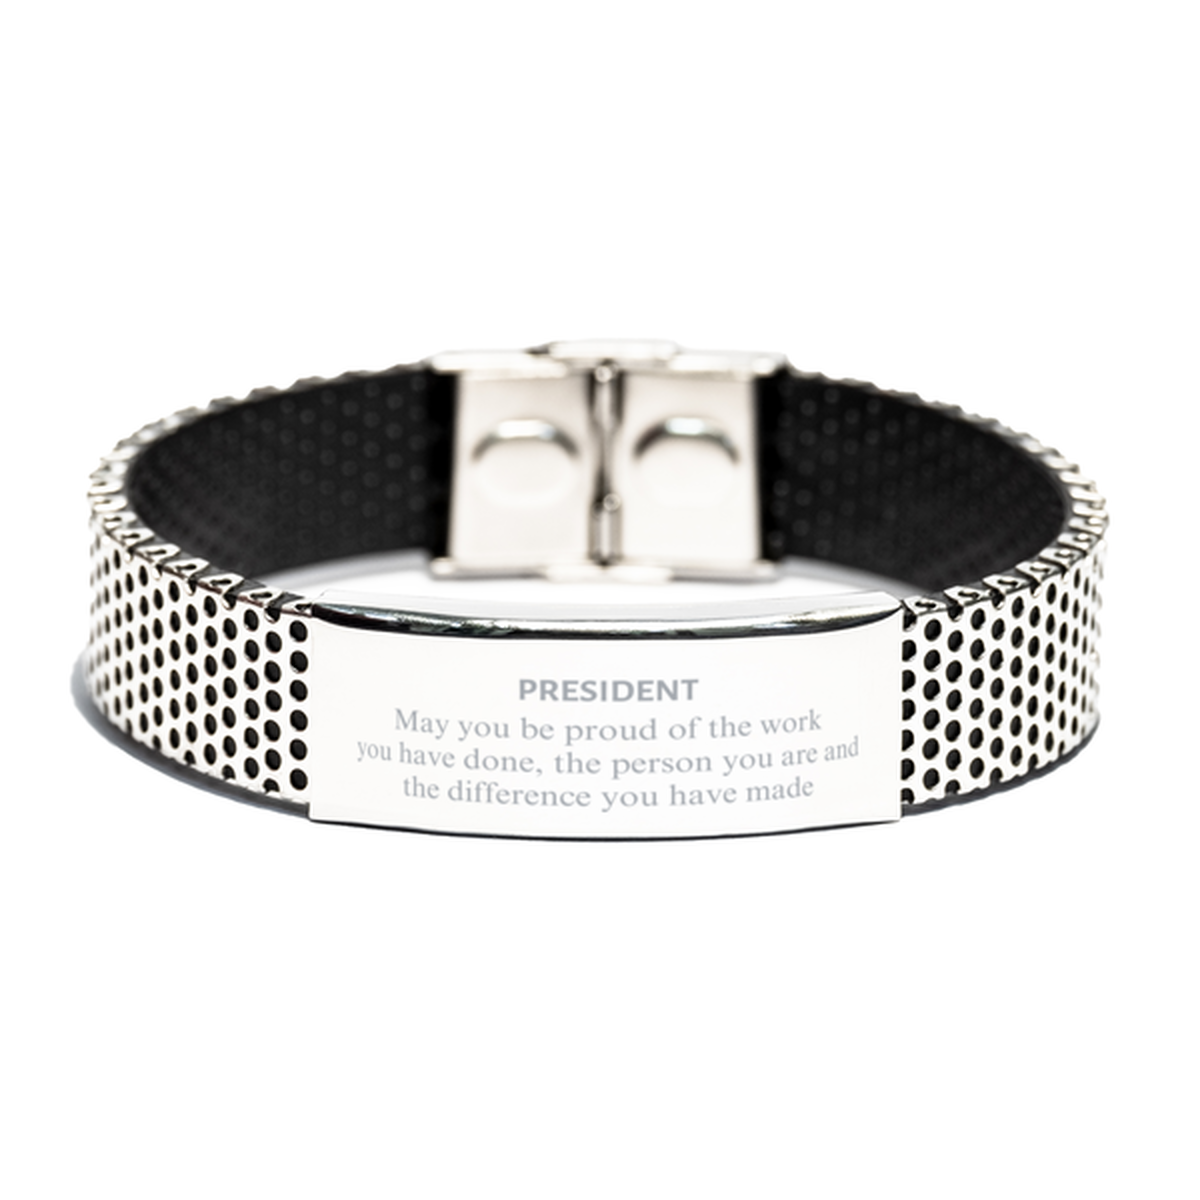 President May you be proud of the work you have done, Retirement President Stainless Steel Bracelet for Colleague Appreciation Gifts Amazing for President